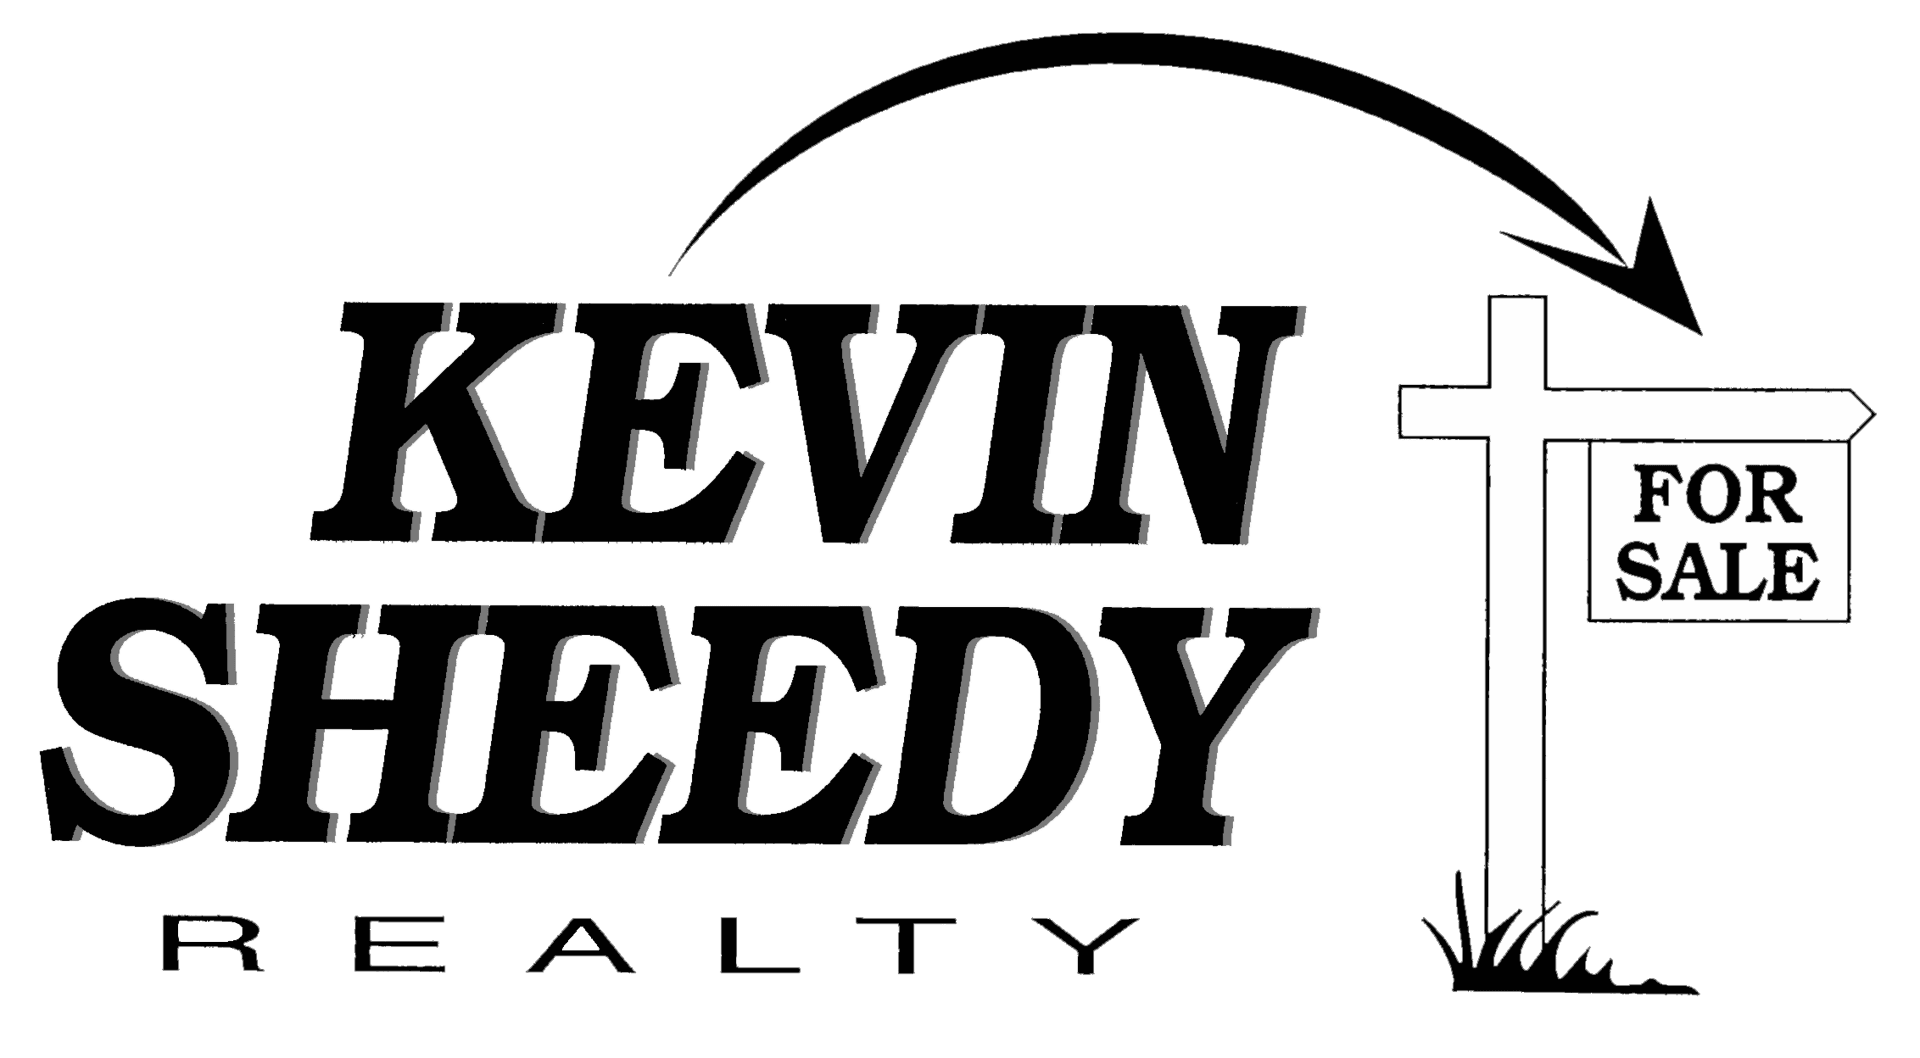 Kevin Sheedy Realty: for sale - logo